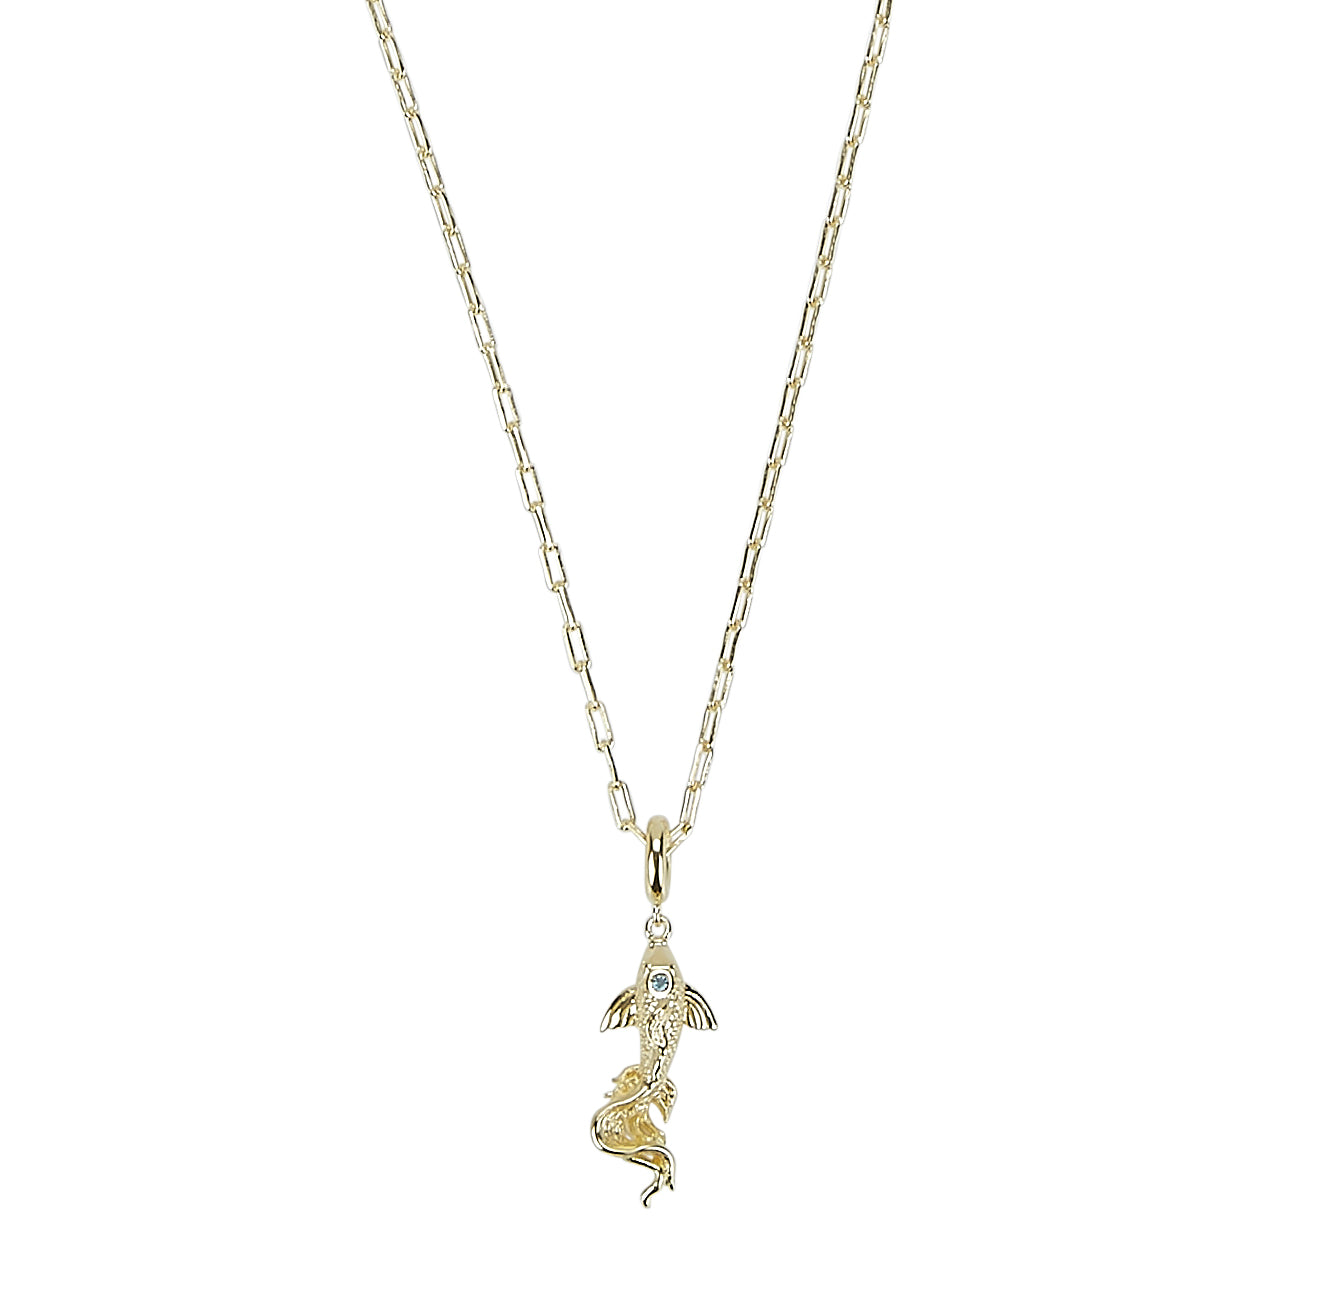 Gold Chain Necklace with Koi Carp London Blue Topaz Charm